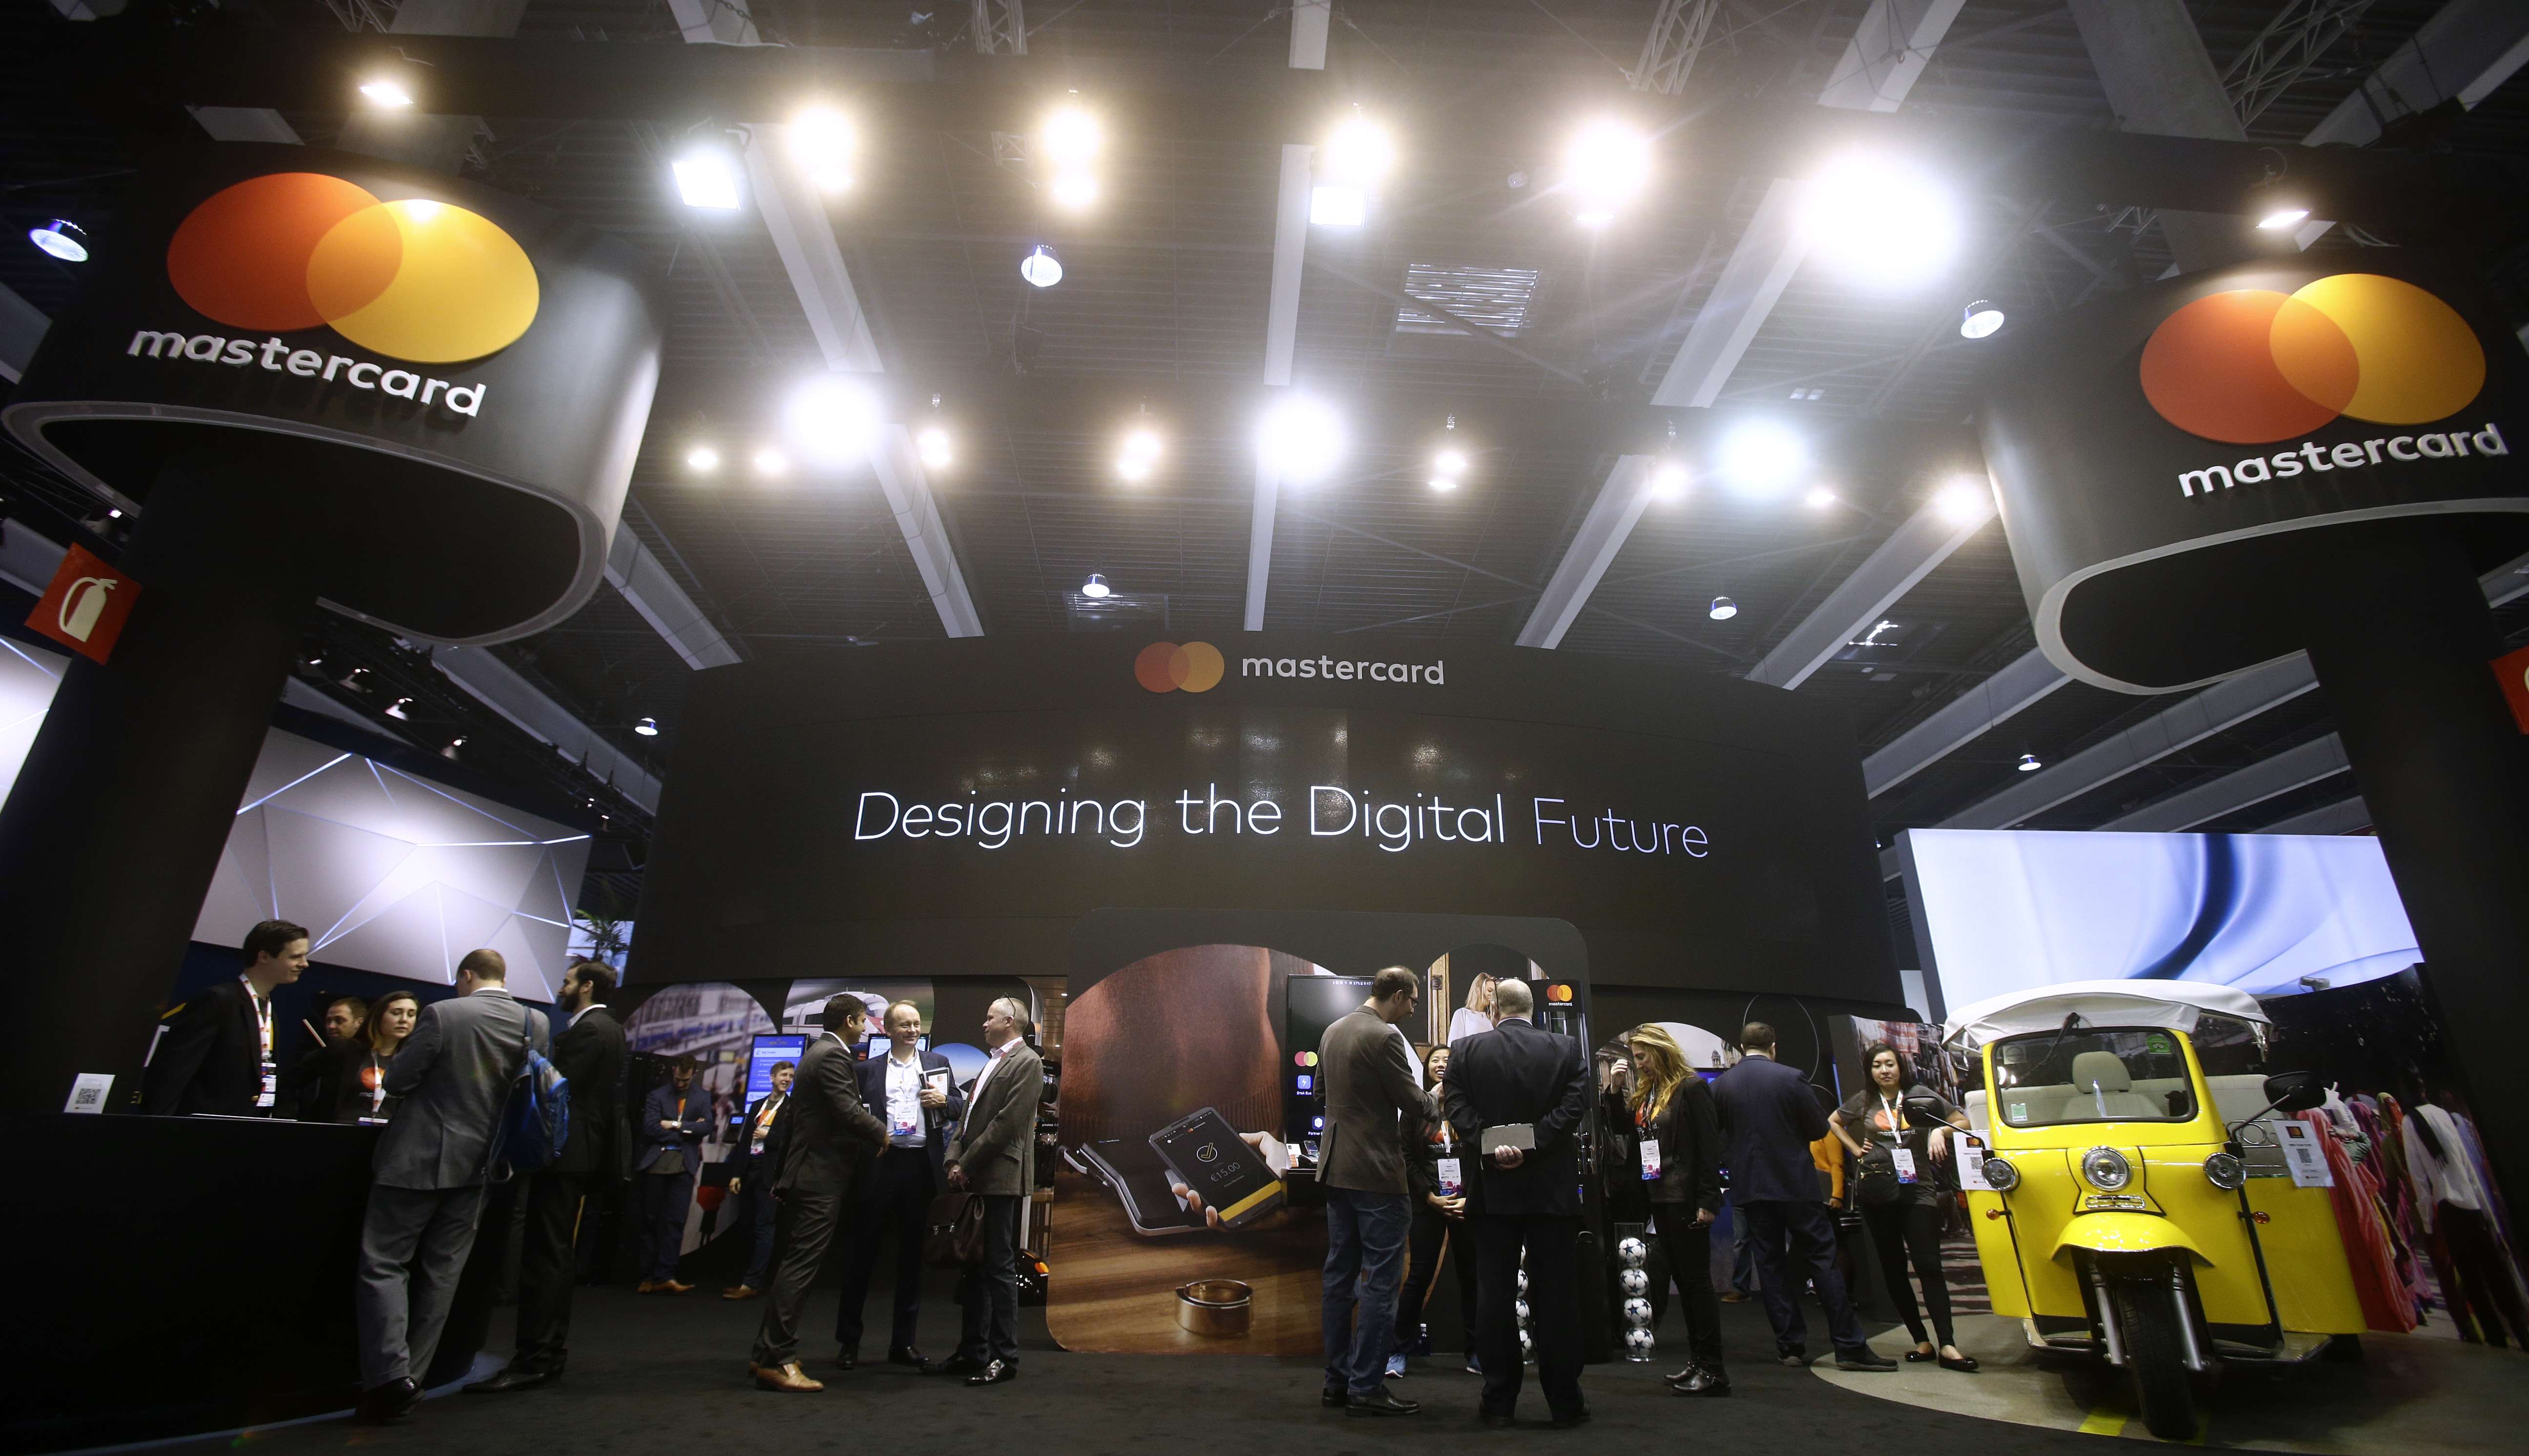 The future of digital payments on display in the Mastercard stand at the Mobile World Congress in Barcelona on Monday. Photo: AP